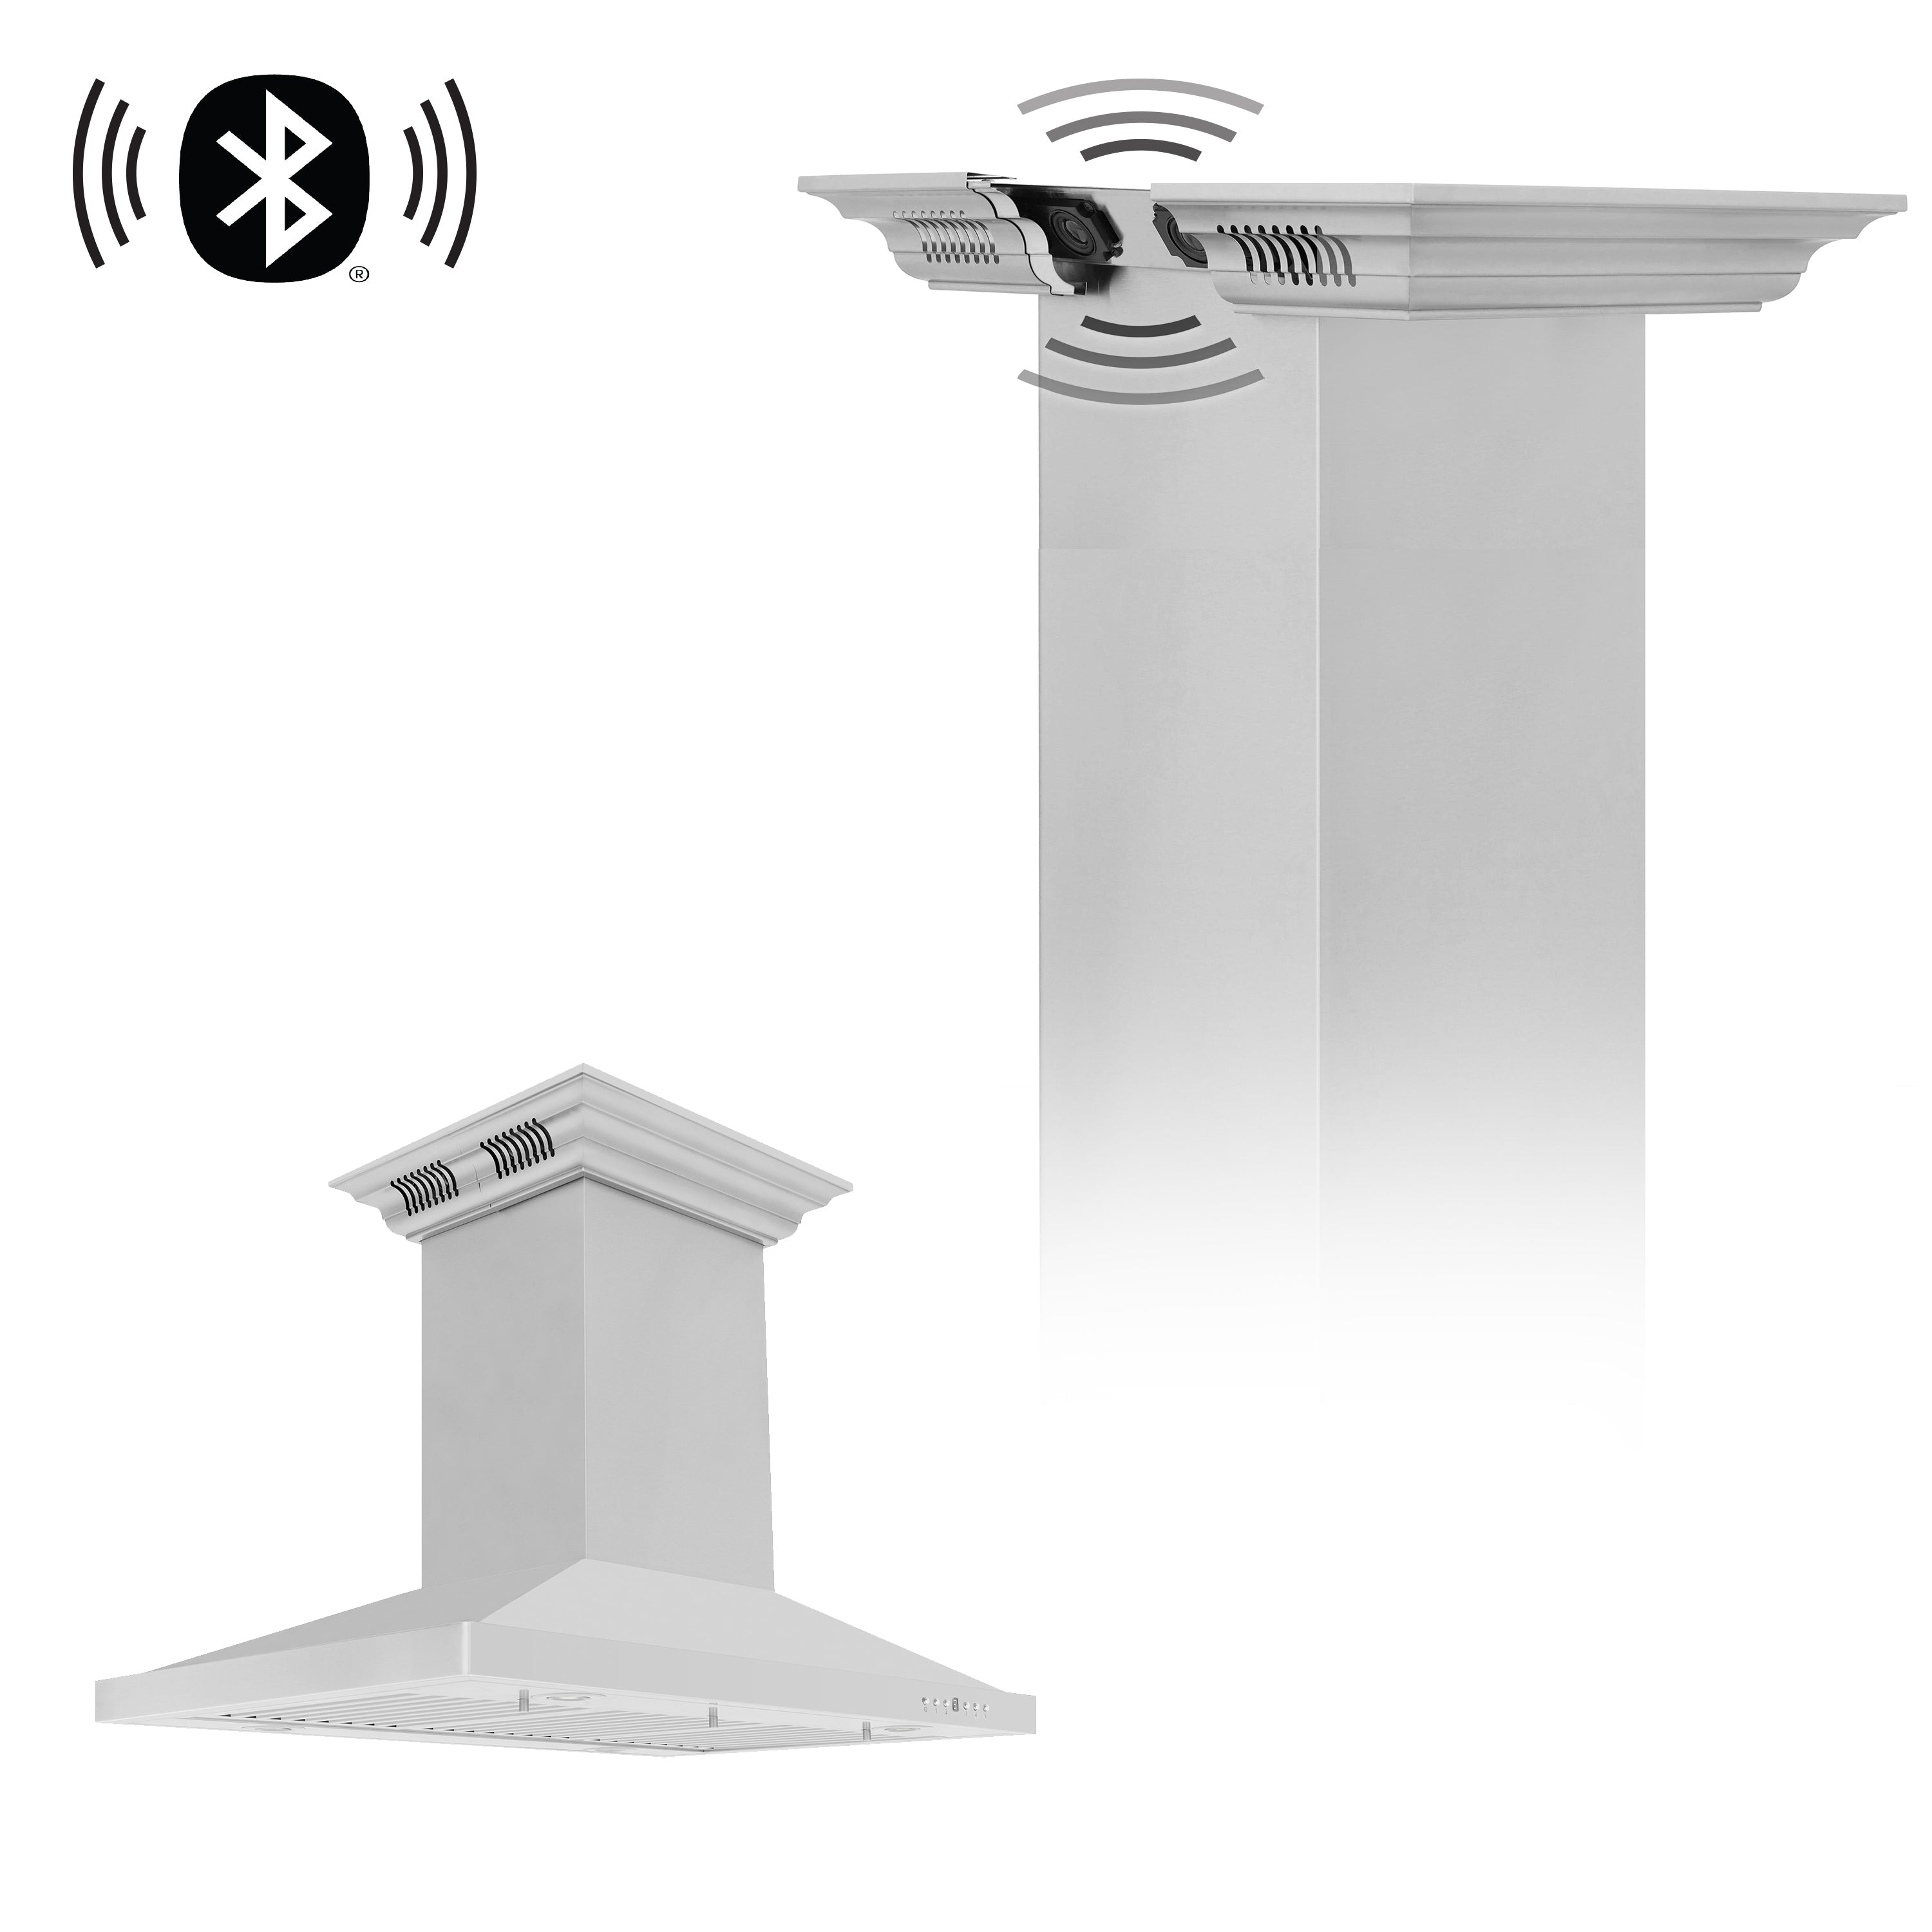 Ducted Vent Island Mount Range Hood in Stainless Steel with Built-in ZLINE CrownSound™ Bluetooth Speakers (GL2iCRN-BT)